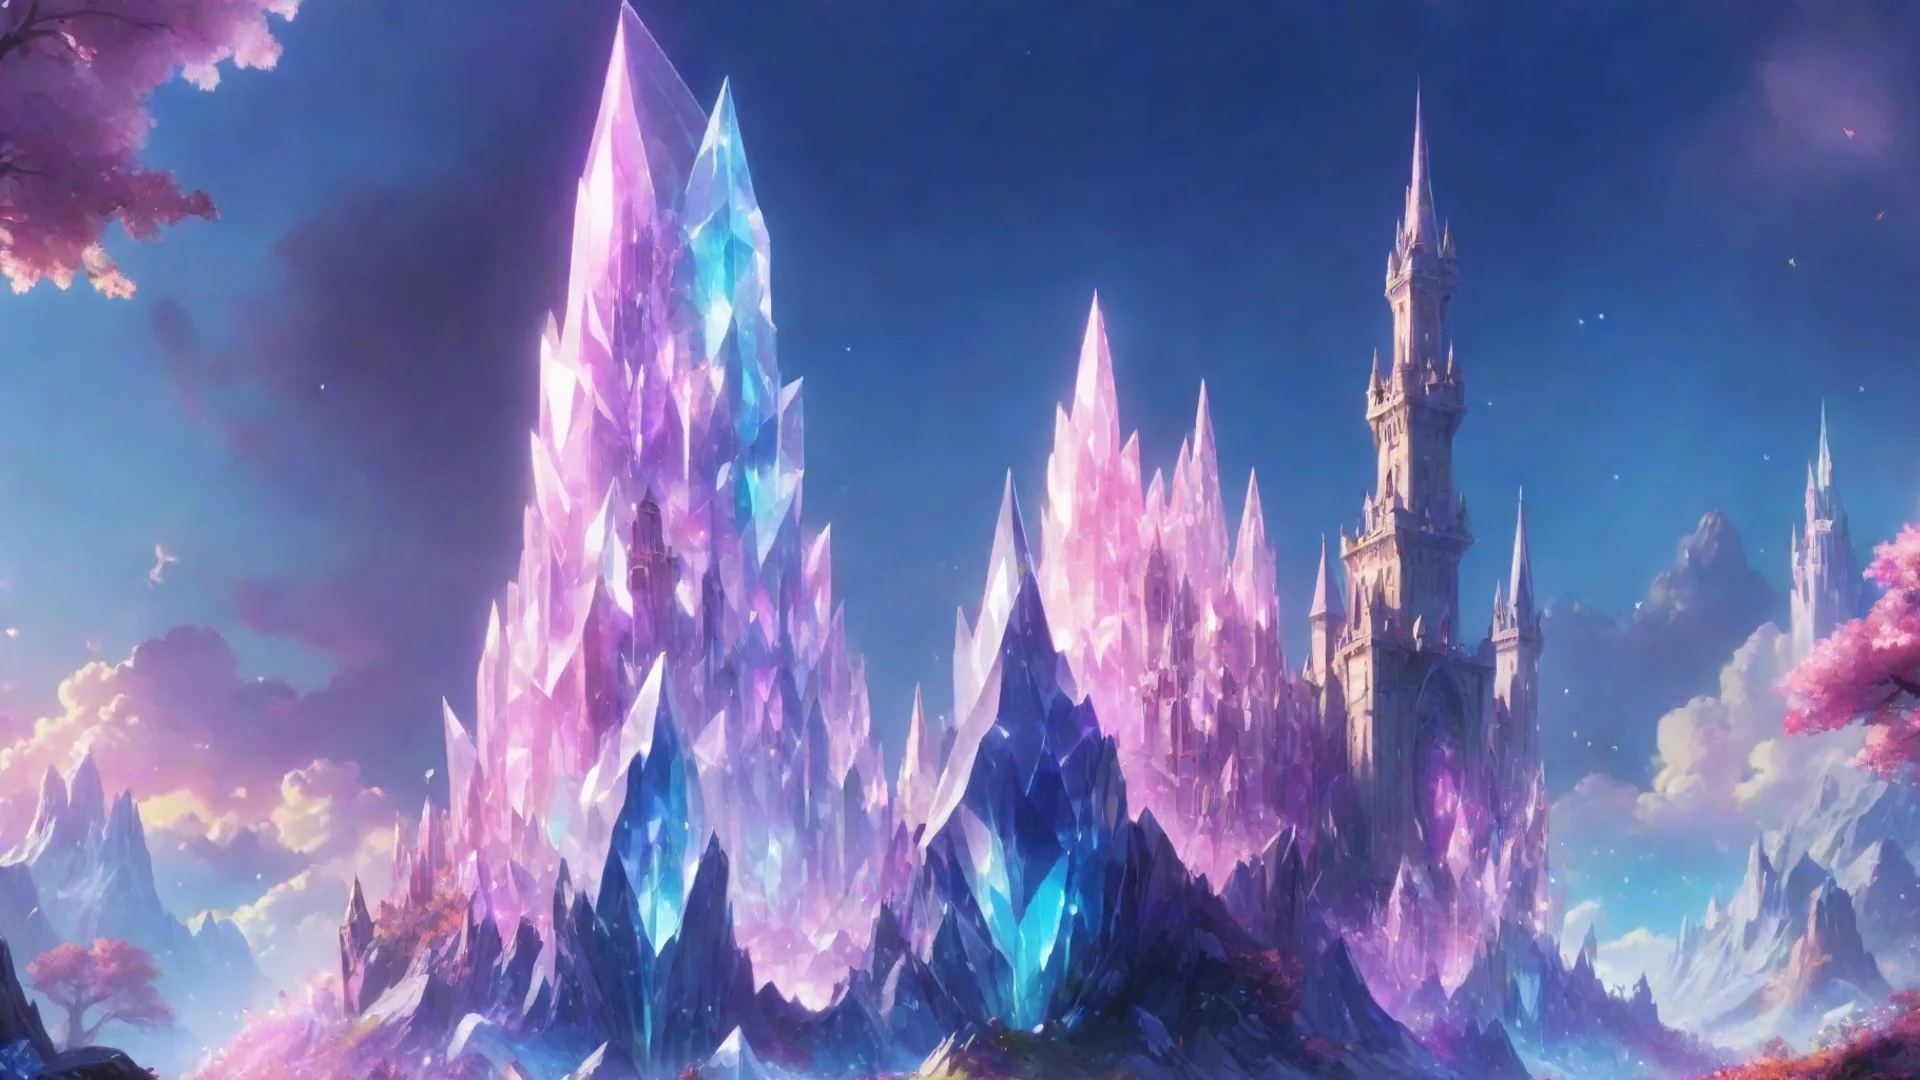 amazing magical world giant crystal with a tower hd aesthetic omg colorful  awesome portrait 2 wide